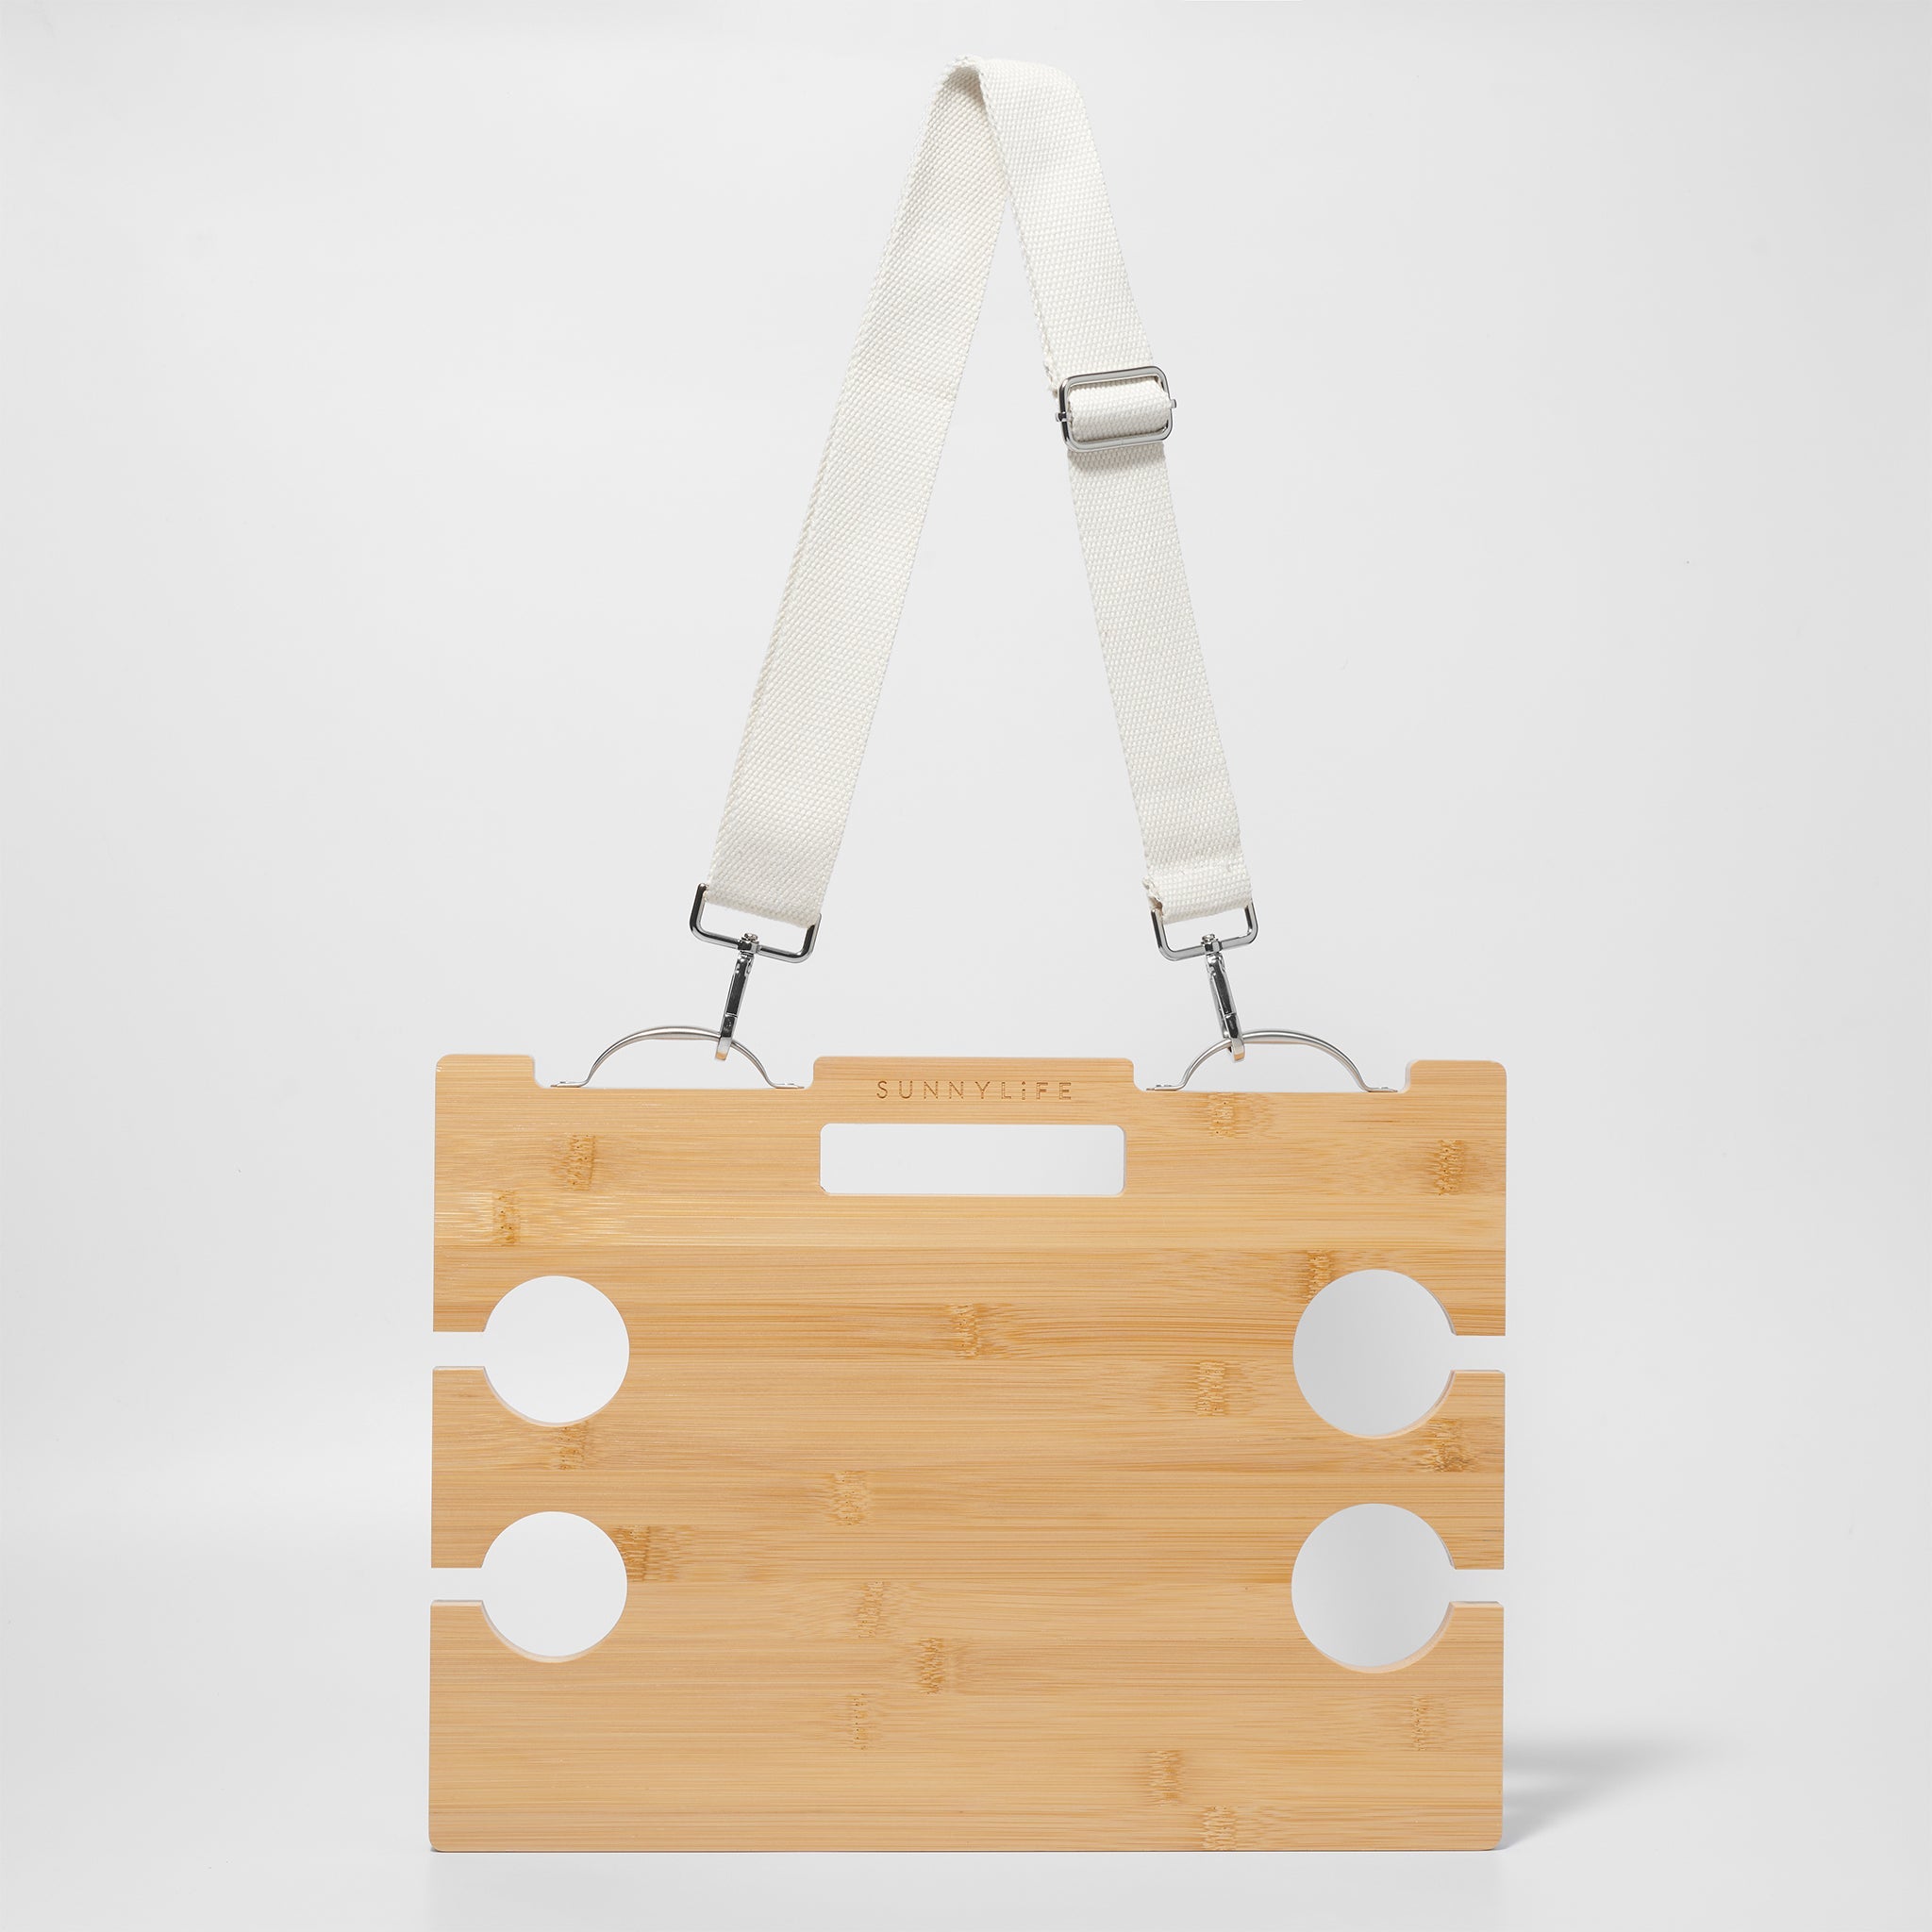 Portable Picnic Table | Le Weekend Natural